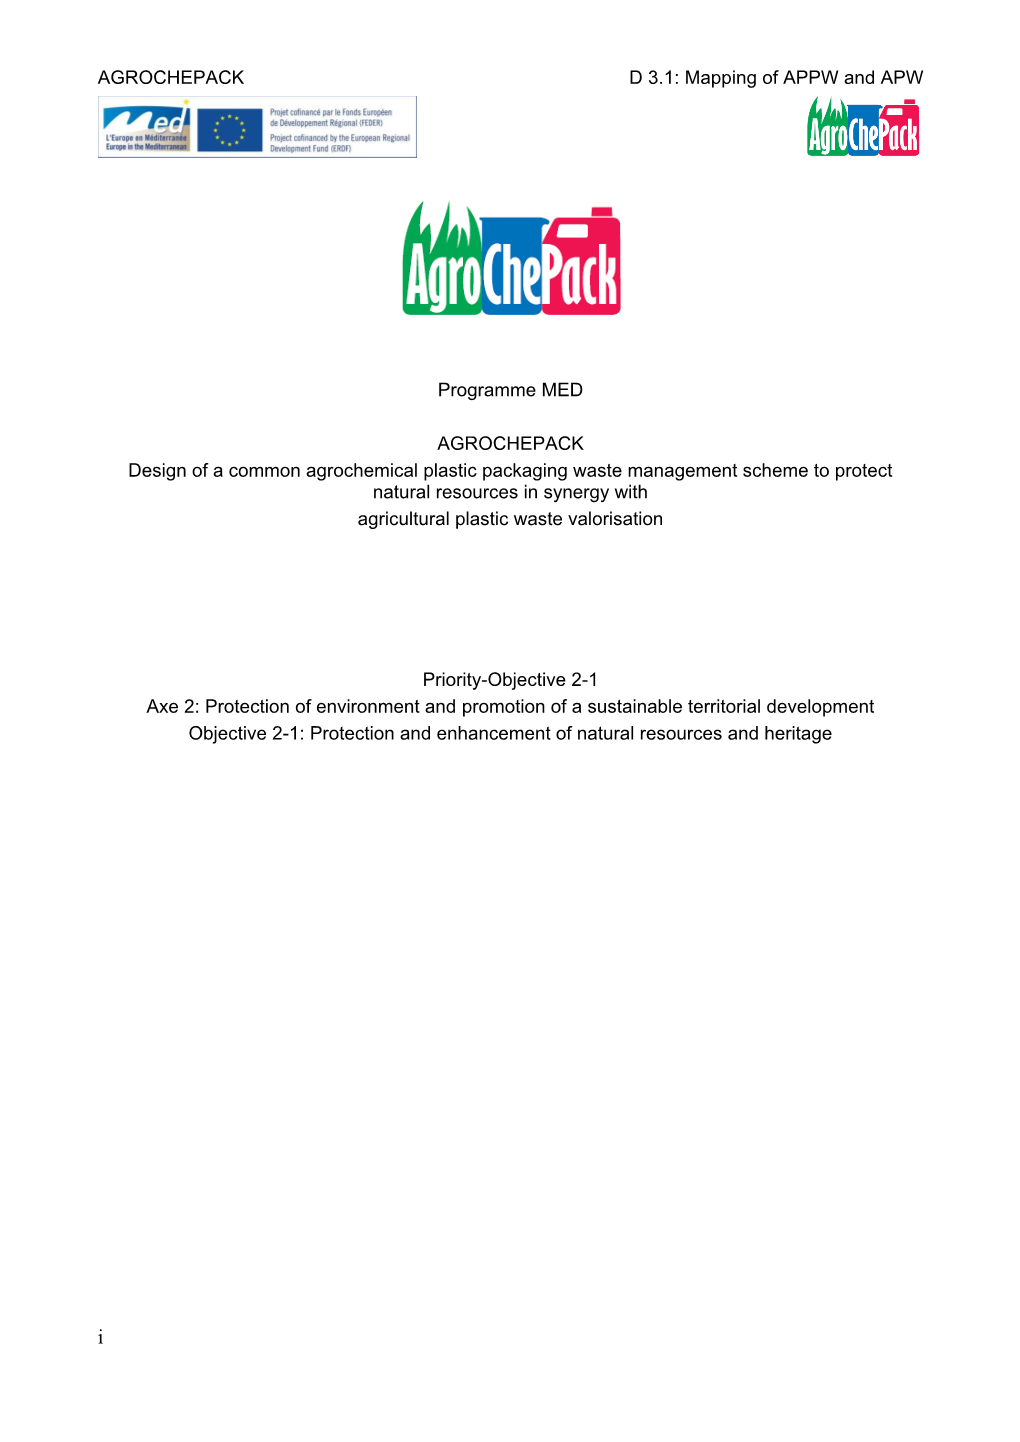 Mapping of APPW and APW Programme MED AGROCHEPACK Design of a Common Agrochemical Plastic Packaging Waste